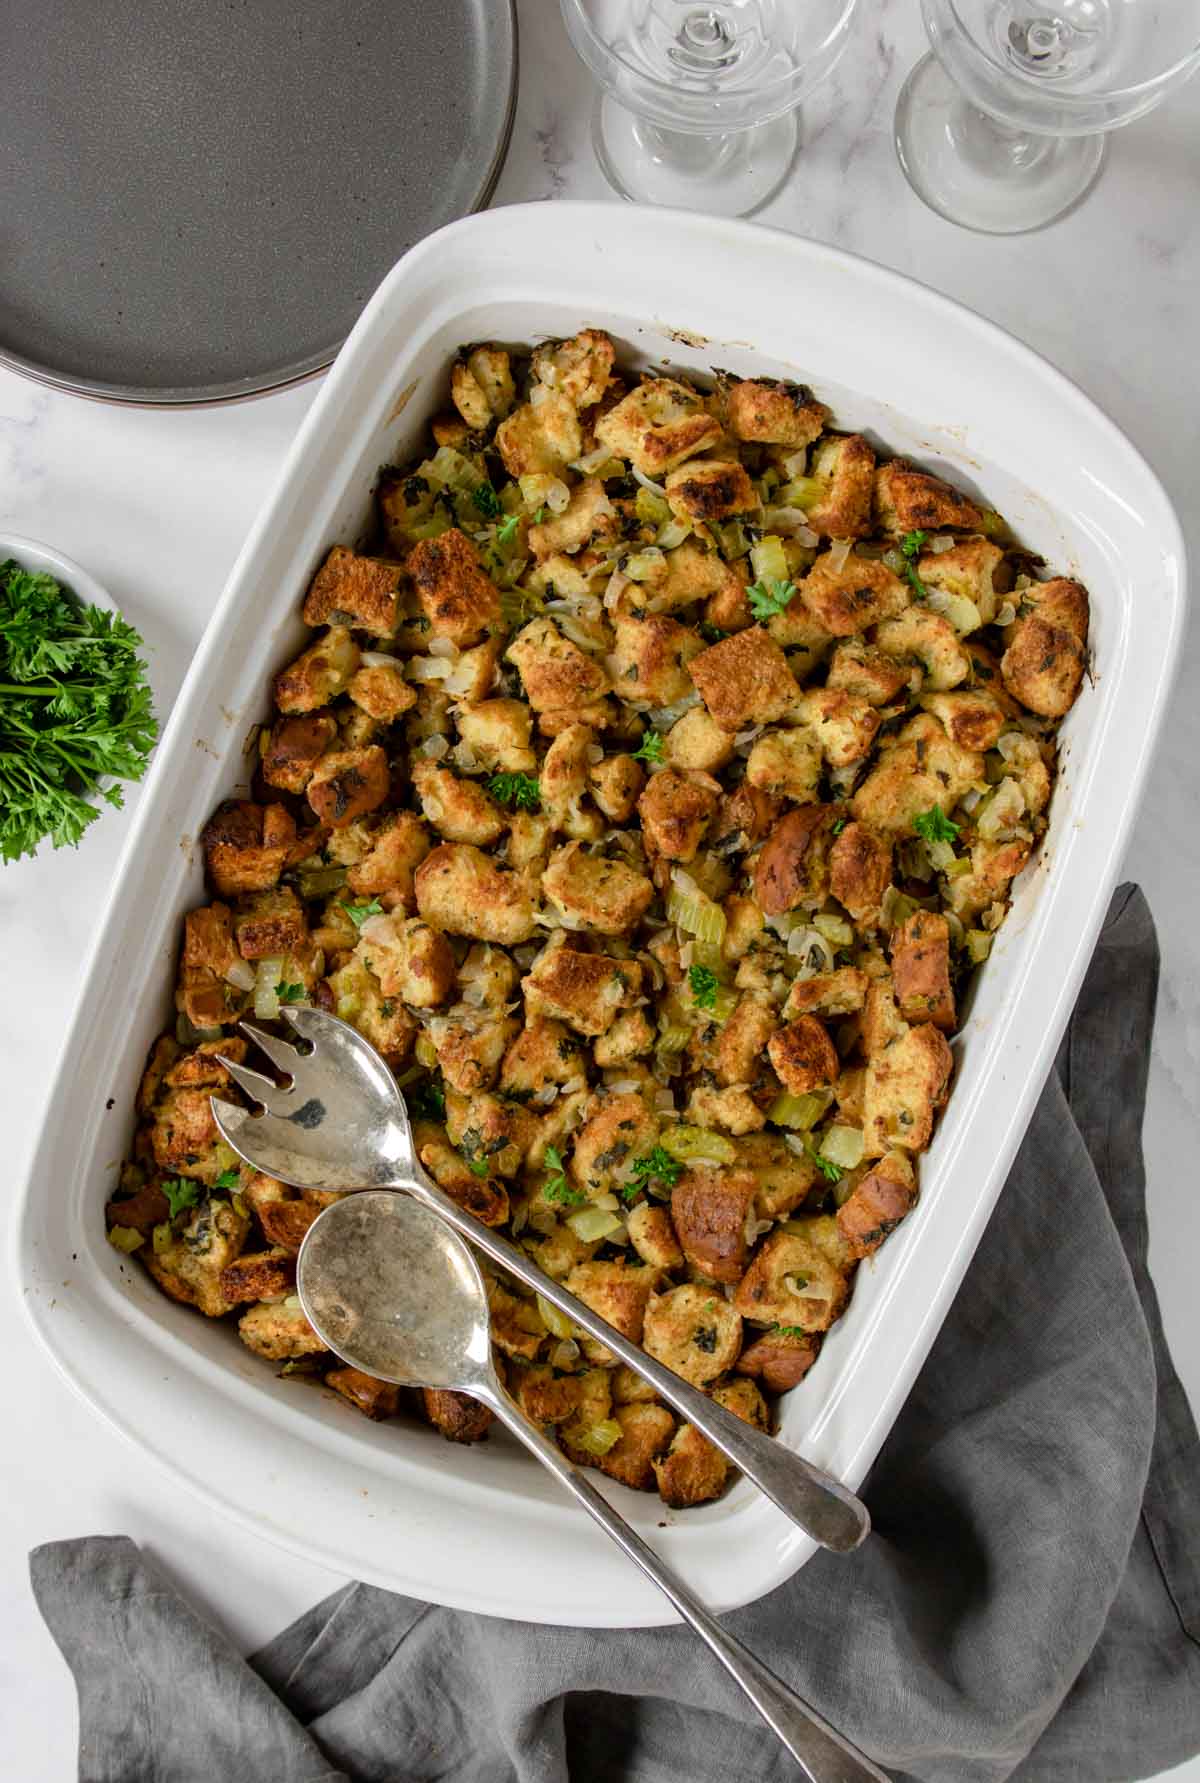 homemade bread stuffing in a baking dish with parsley garnish